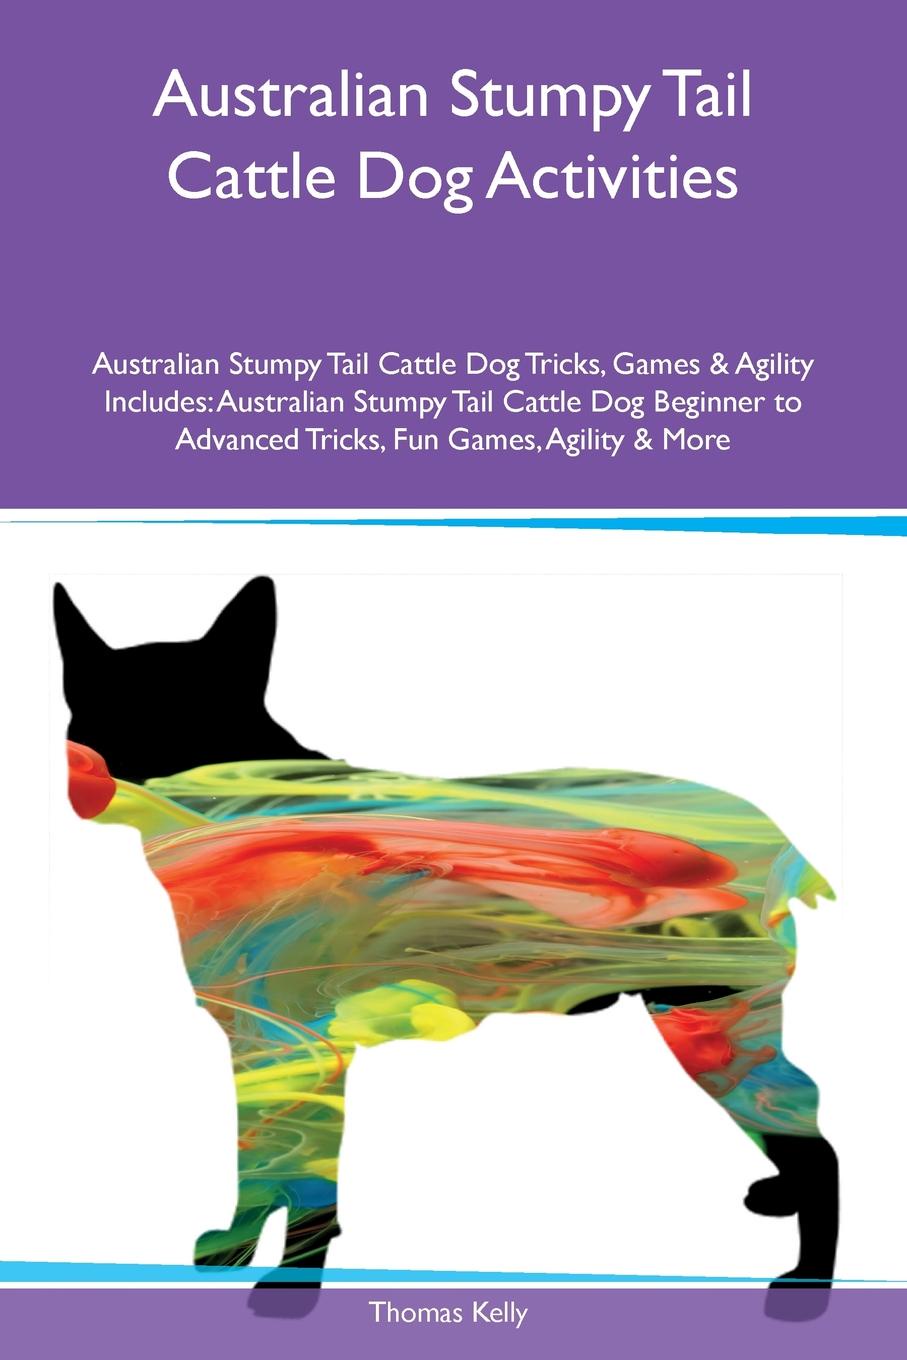 Australian Stumpy Tail Cattle Dog Activities Australian Stumpy Tail Cattle Dog Tricks, Games & Agility Includes. Australian Stumpy Tail Cattle Dog Beginner to Advanced Tricks, Fun Games, Agility & More